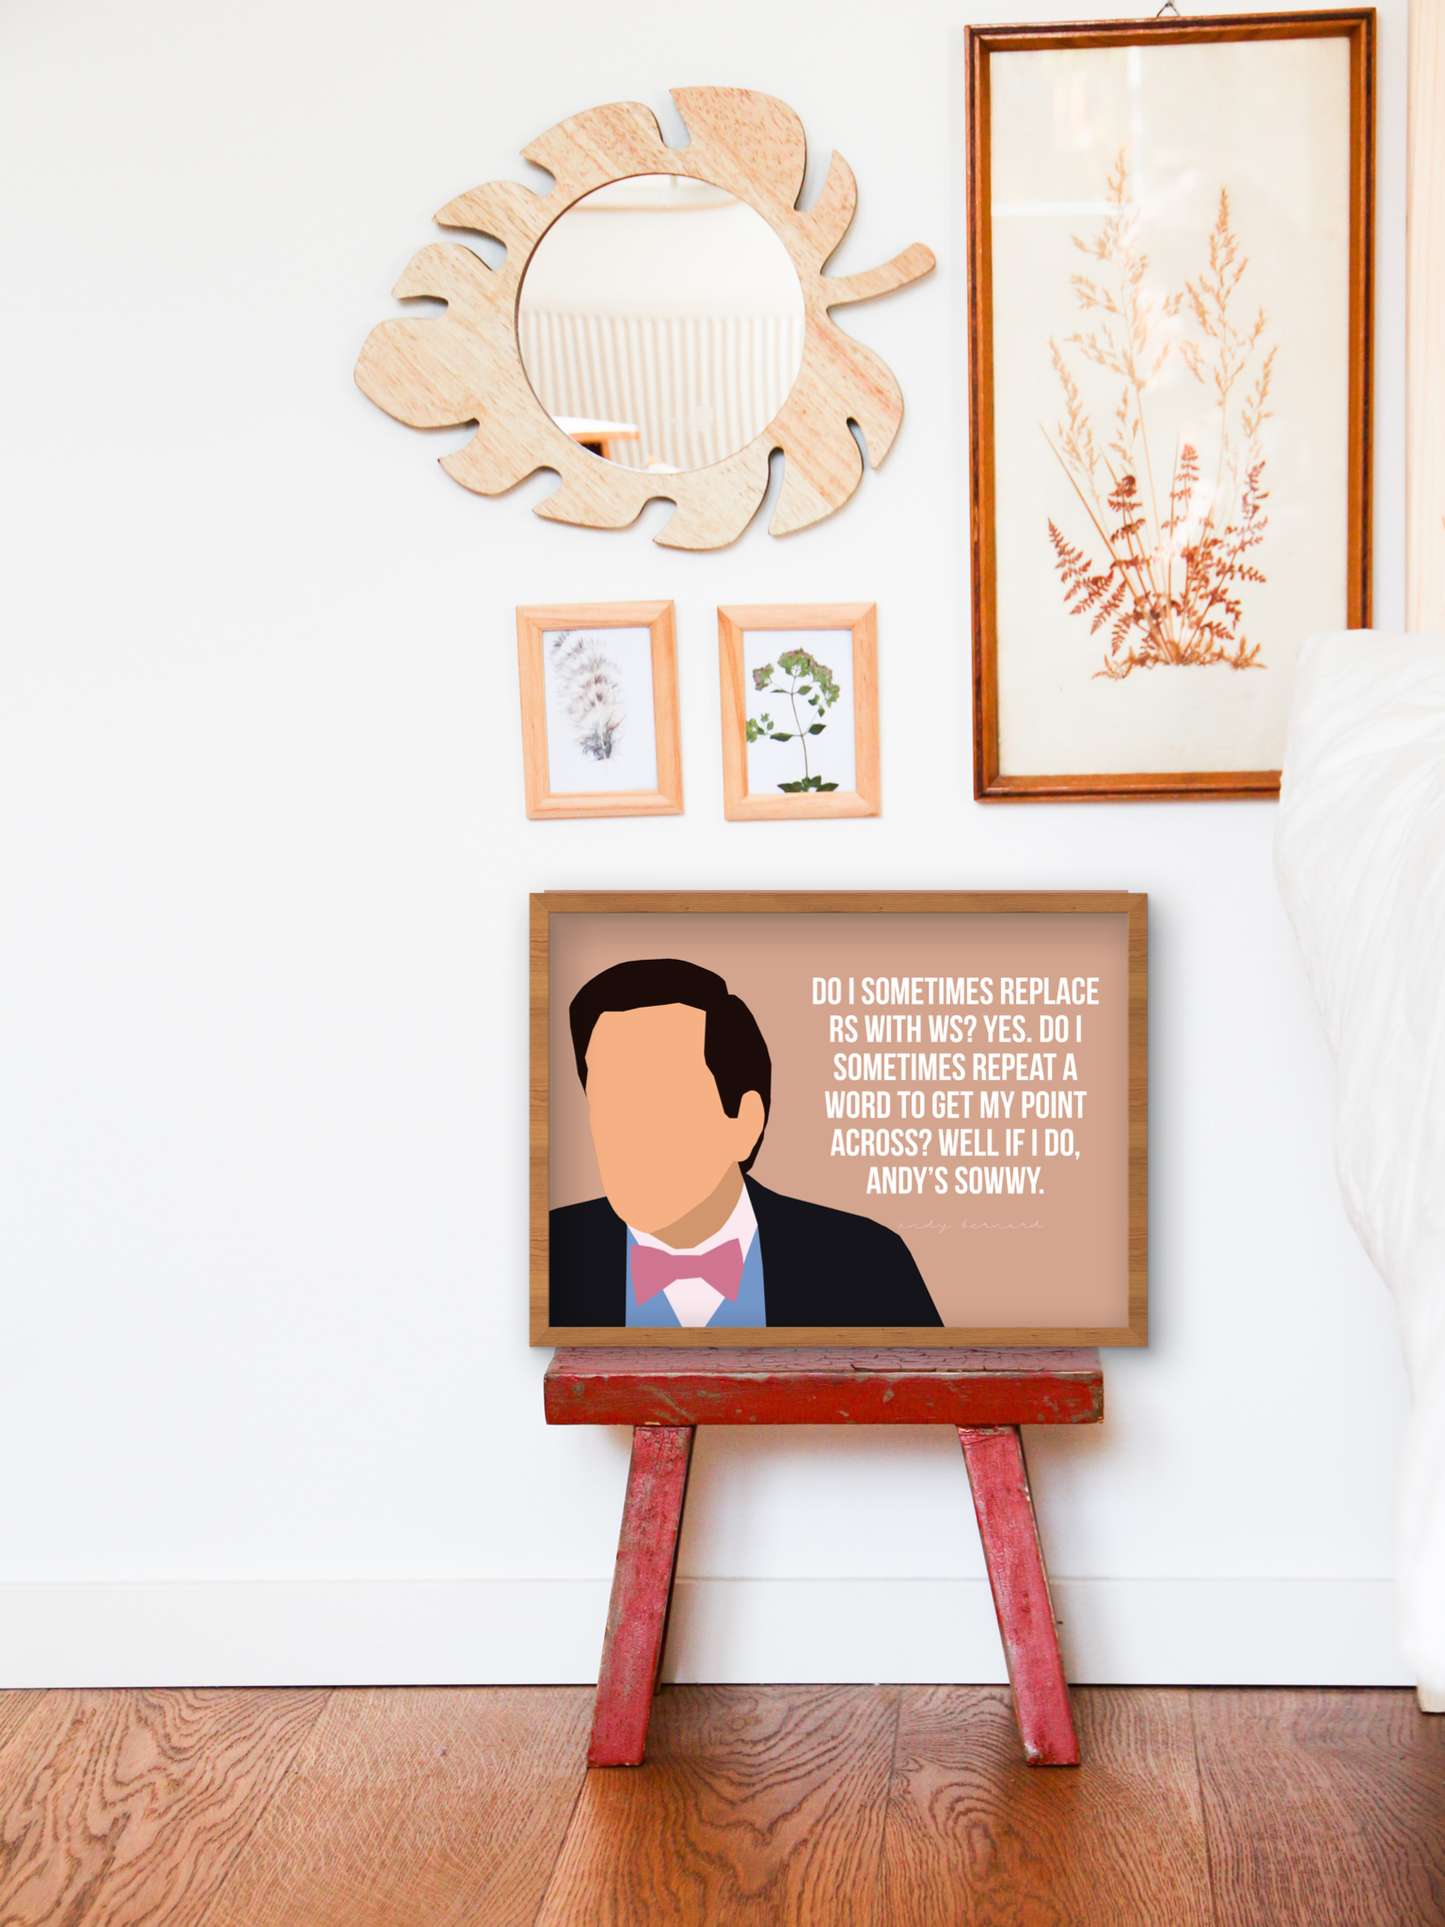 The Office's Andy Bernadd art print with funny quote